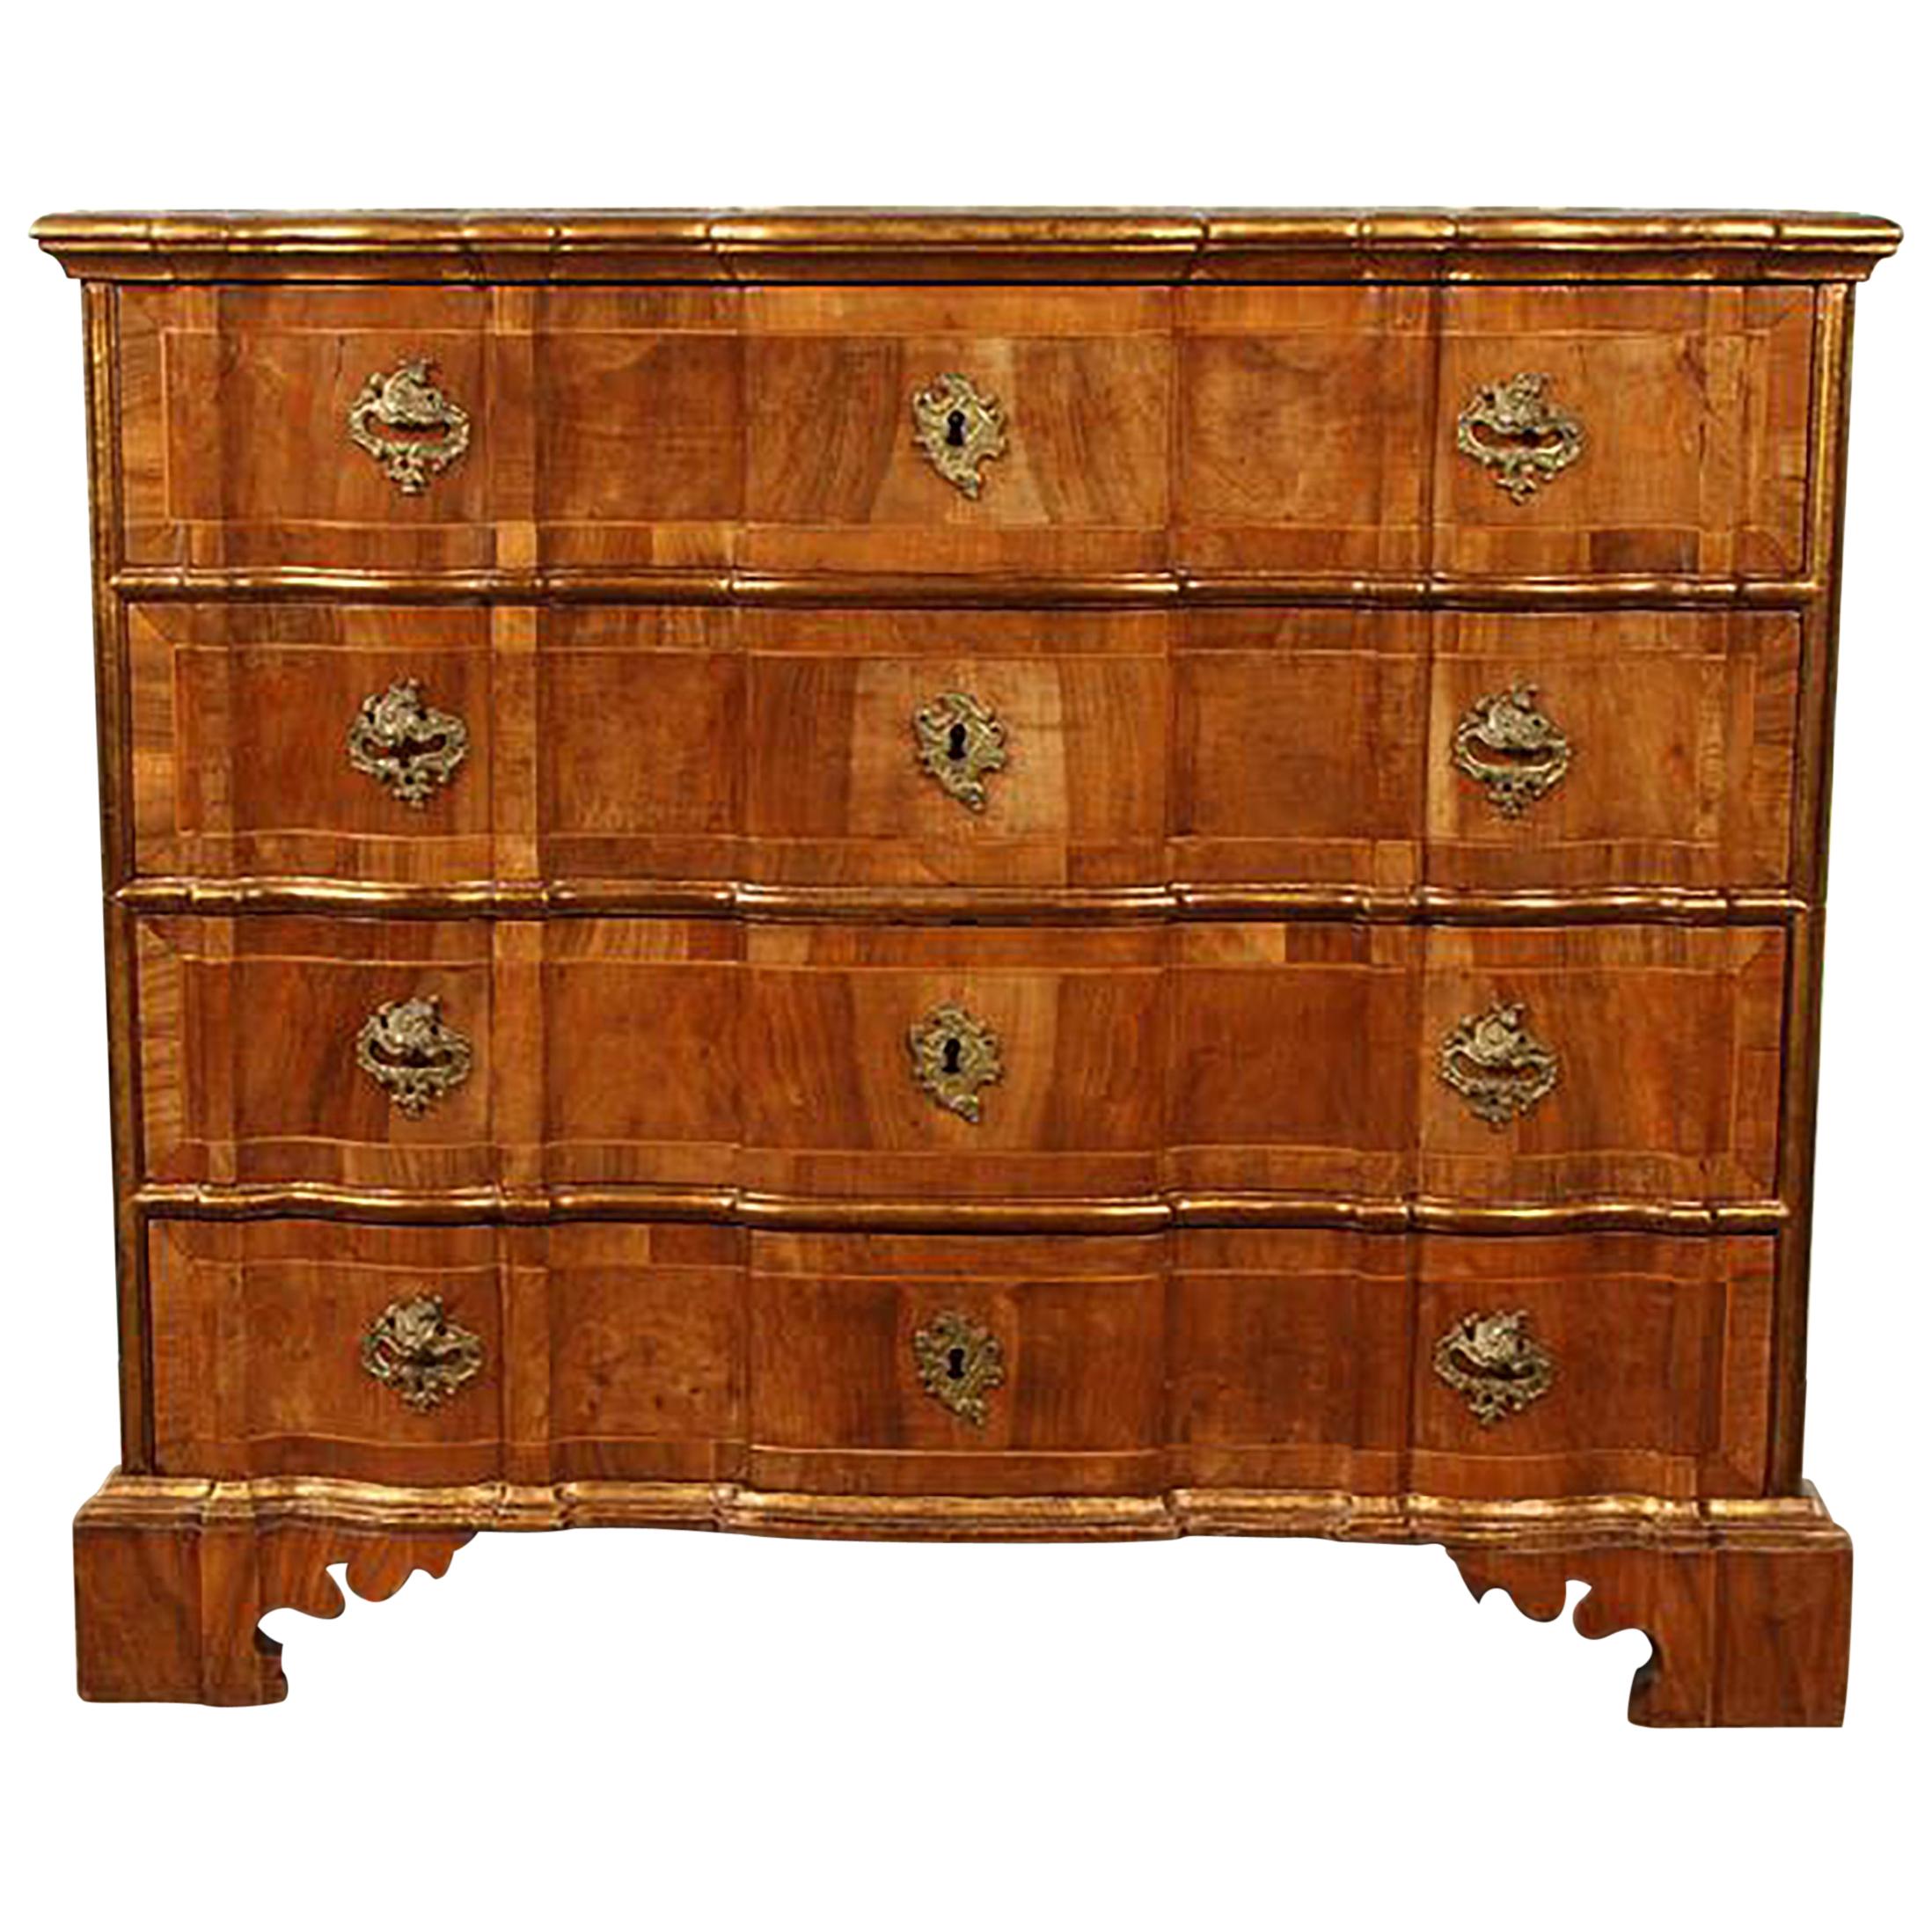 18th Century Danish Rococo Chest of Drawers with Key